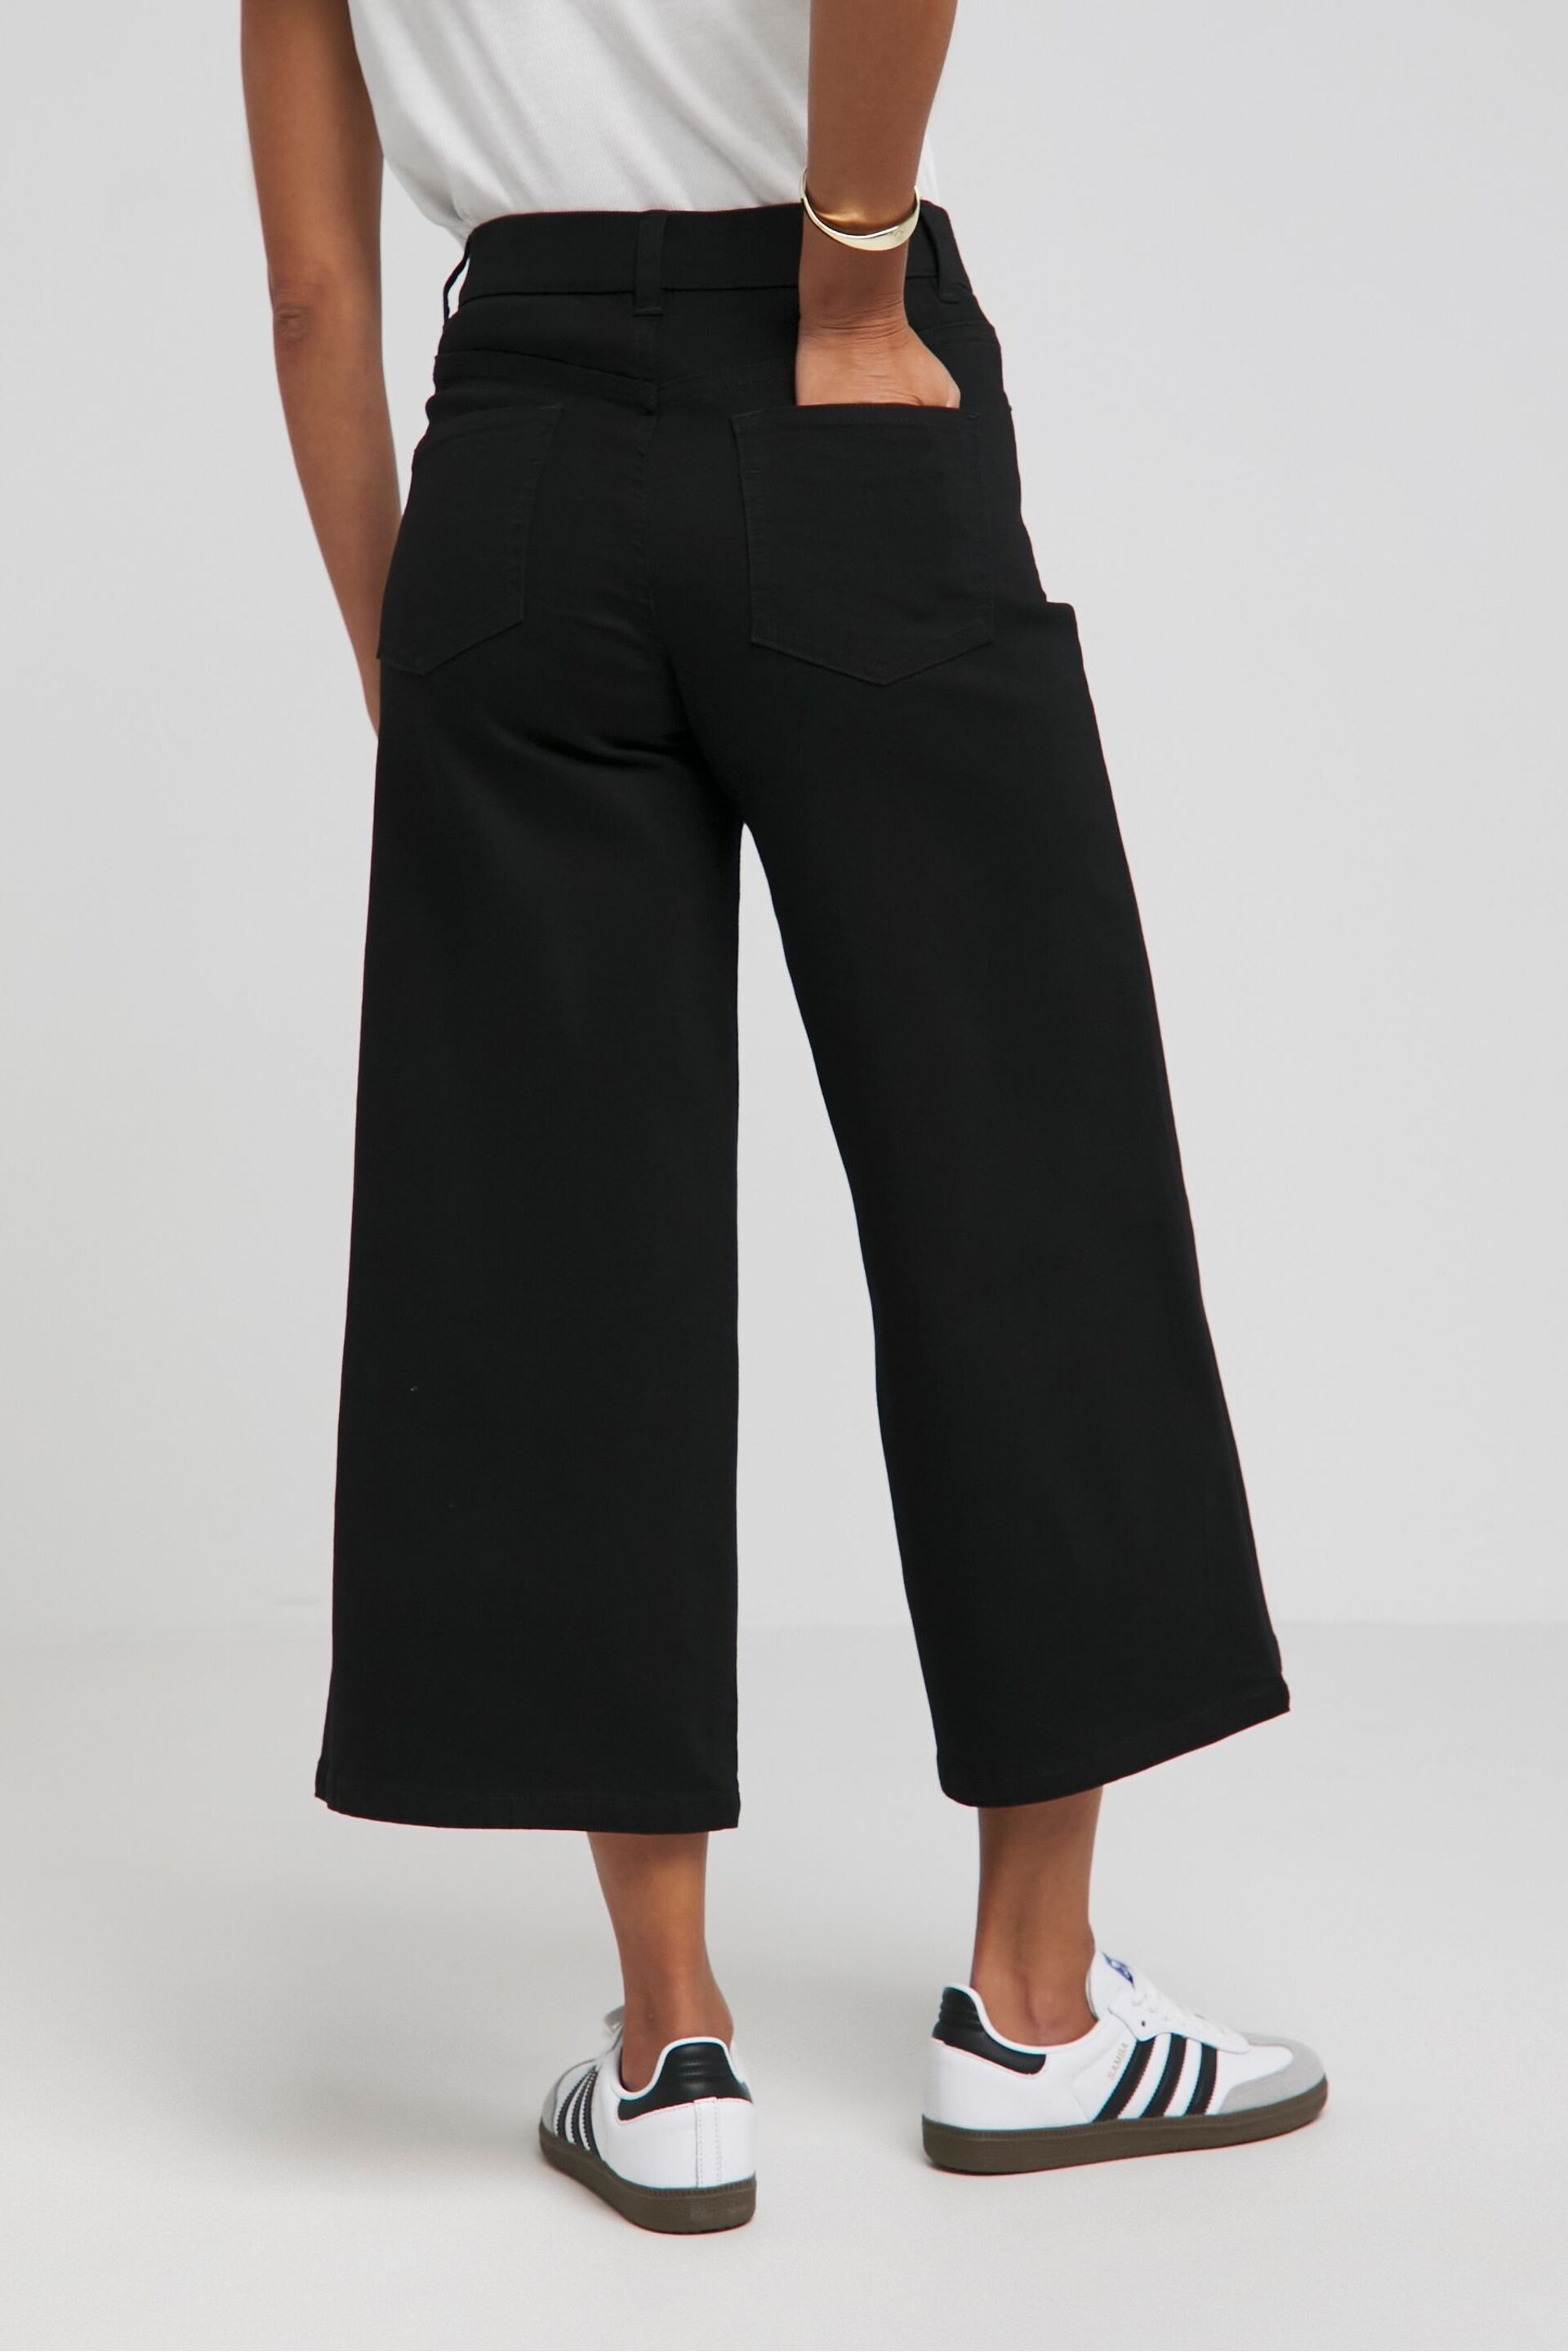 Simply Be Black 24/7 Cropped Wide Leg Jeans - Image 3 of 4